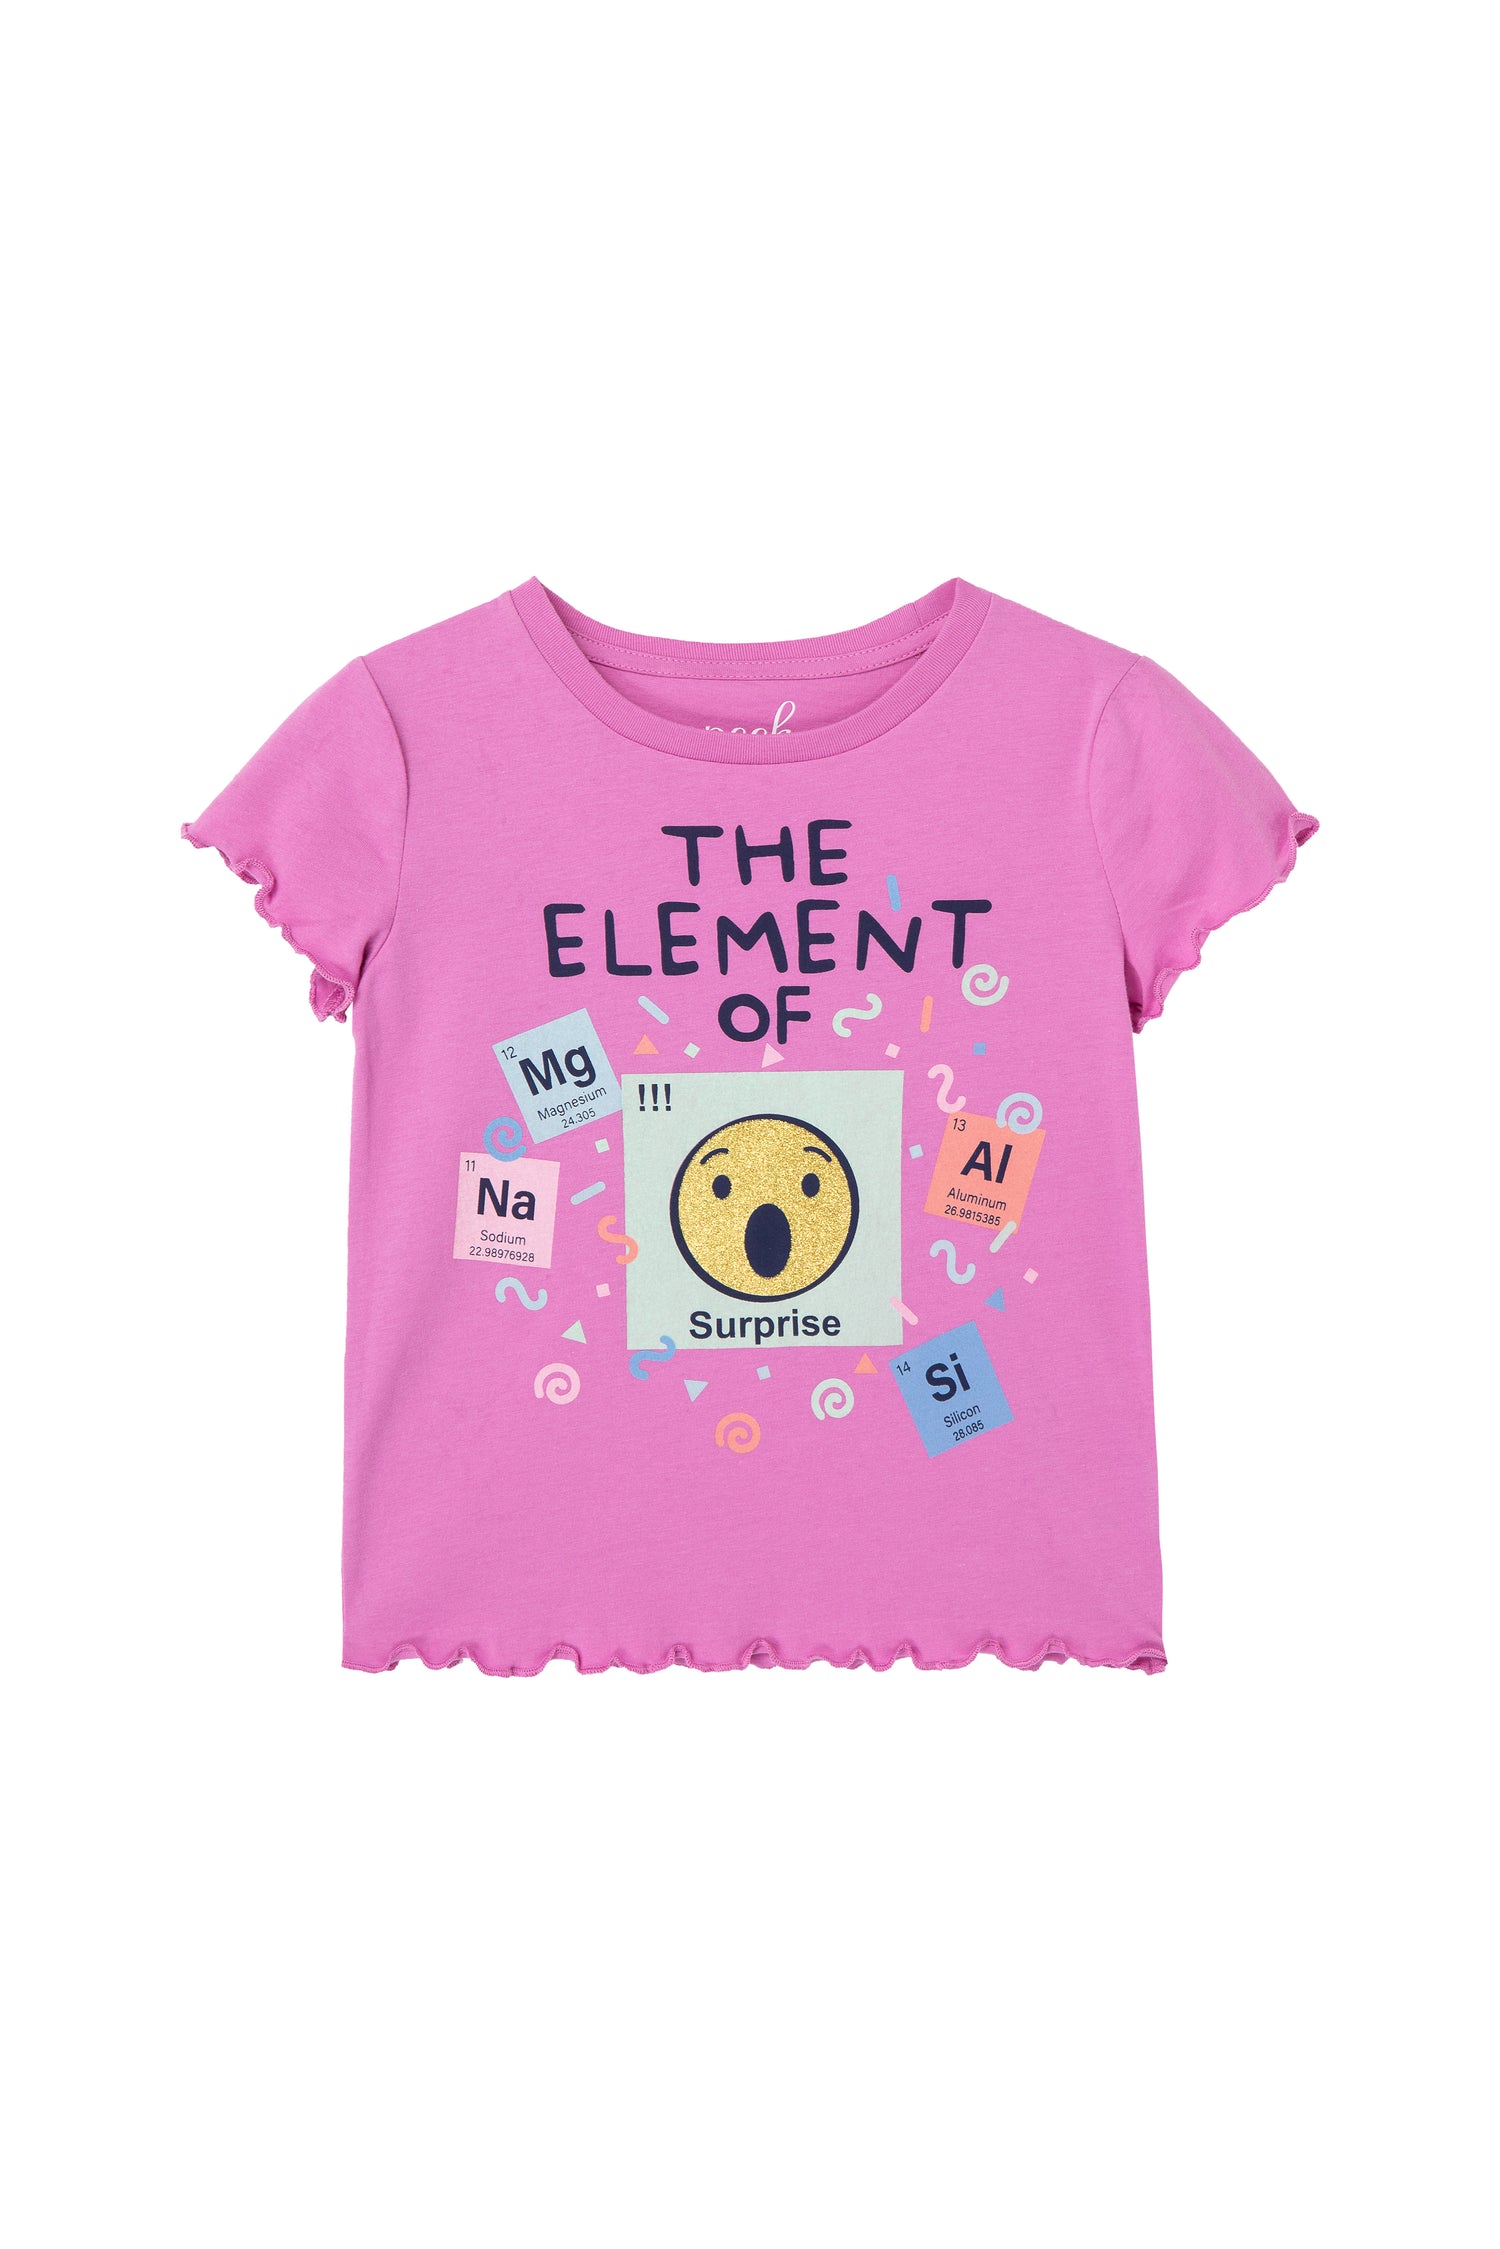 Pink tee shirt with ruffled short sleeves, "element of surprise" text on front